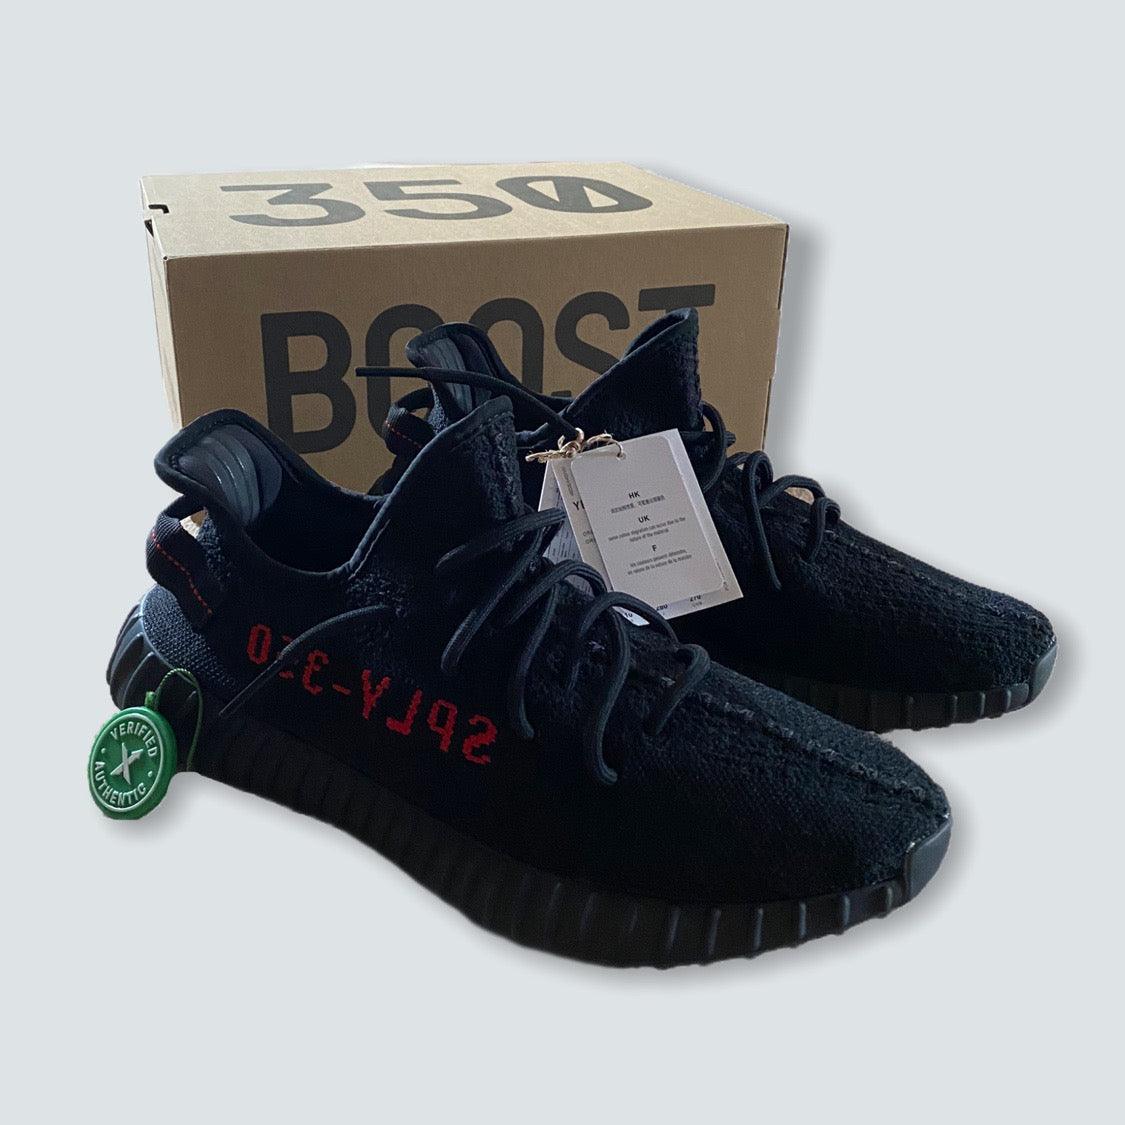 Brand new Yeezy V2 350 Breds black and red + stock x tag (uk9.5) - Known Source